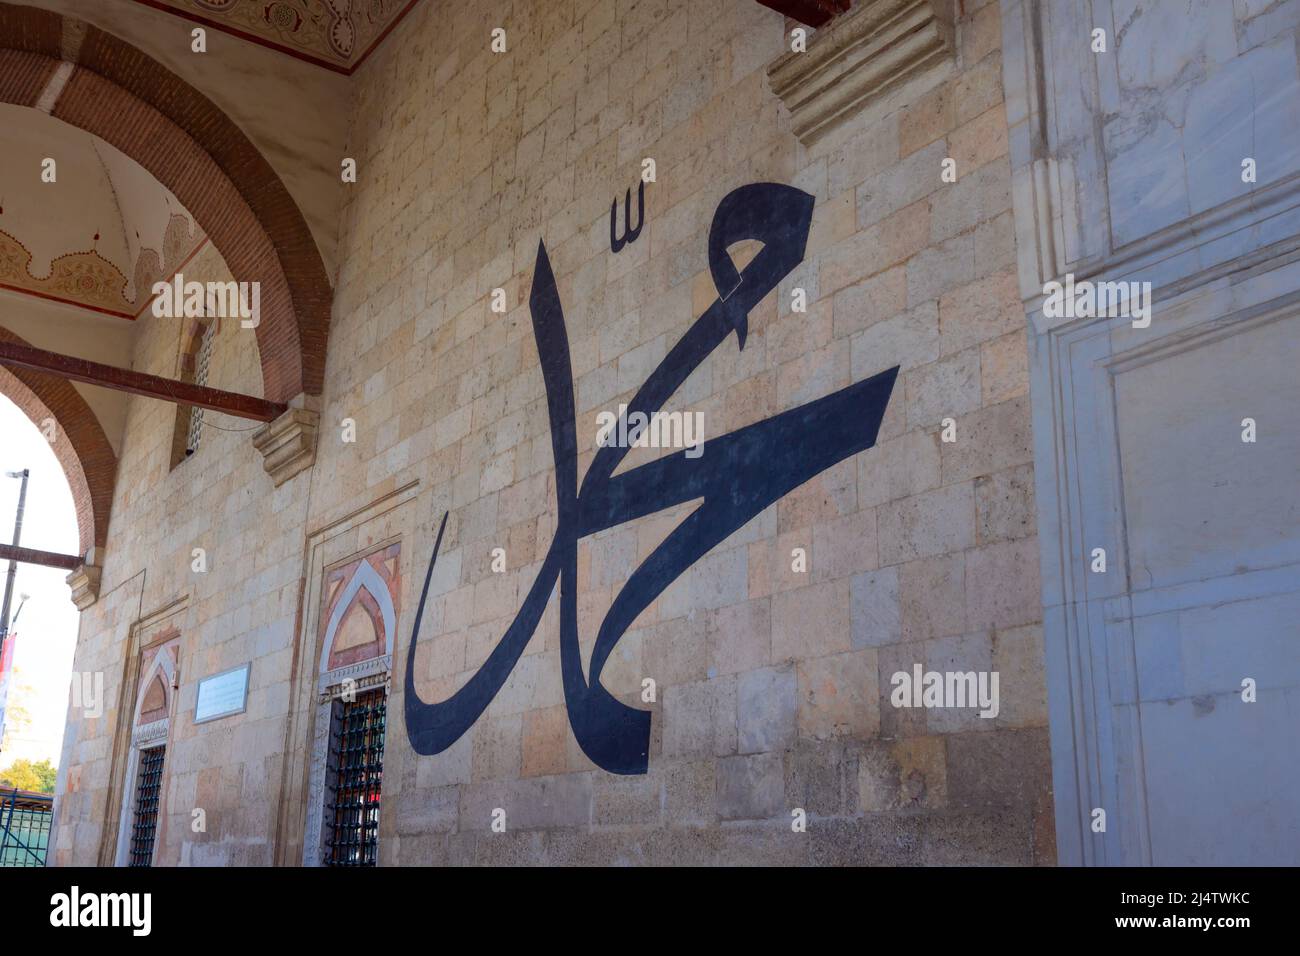 Prophet Mohammad name. Calligraphy of the name of Prophet Muhammad on the wall of a mosque. Friday pray or ramadan or islamic background photo. Stock Photo